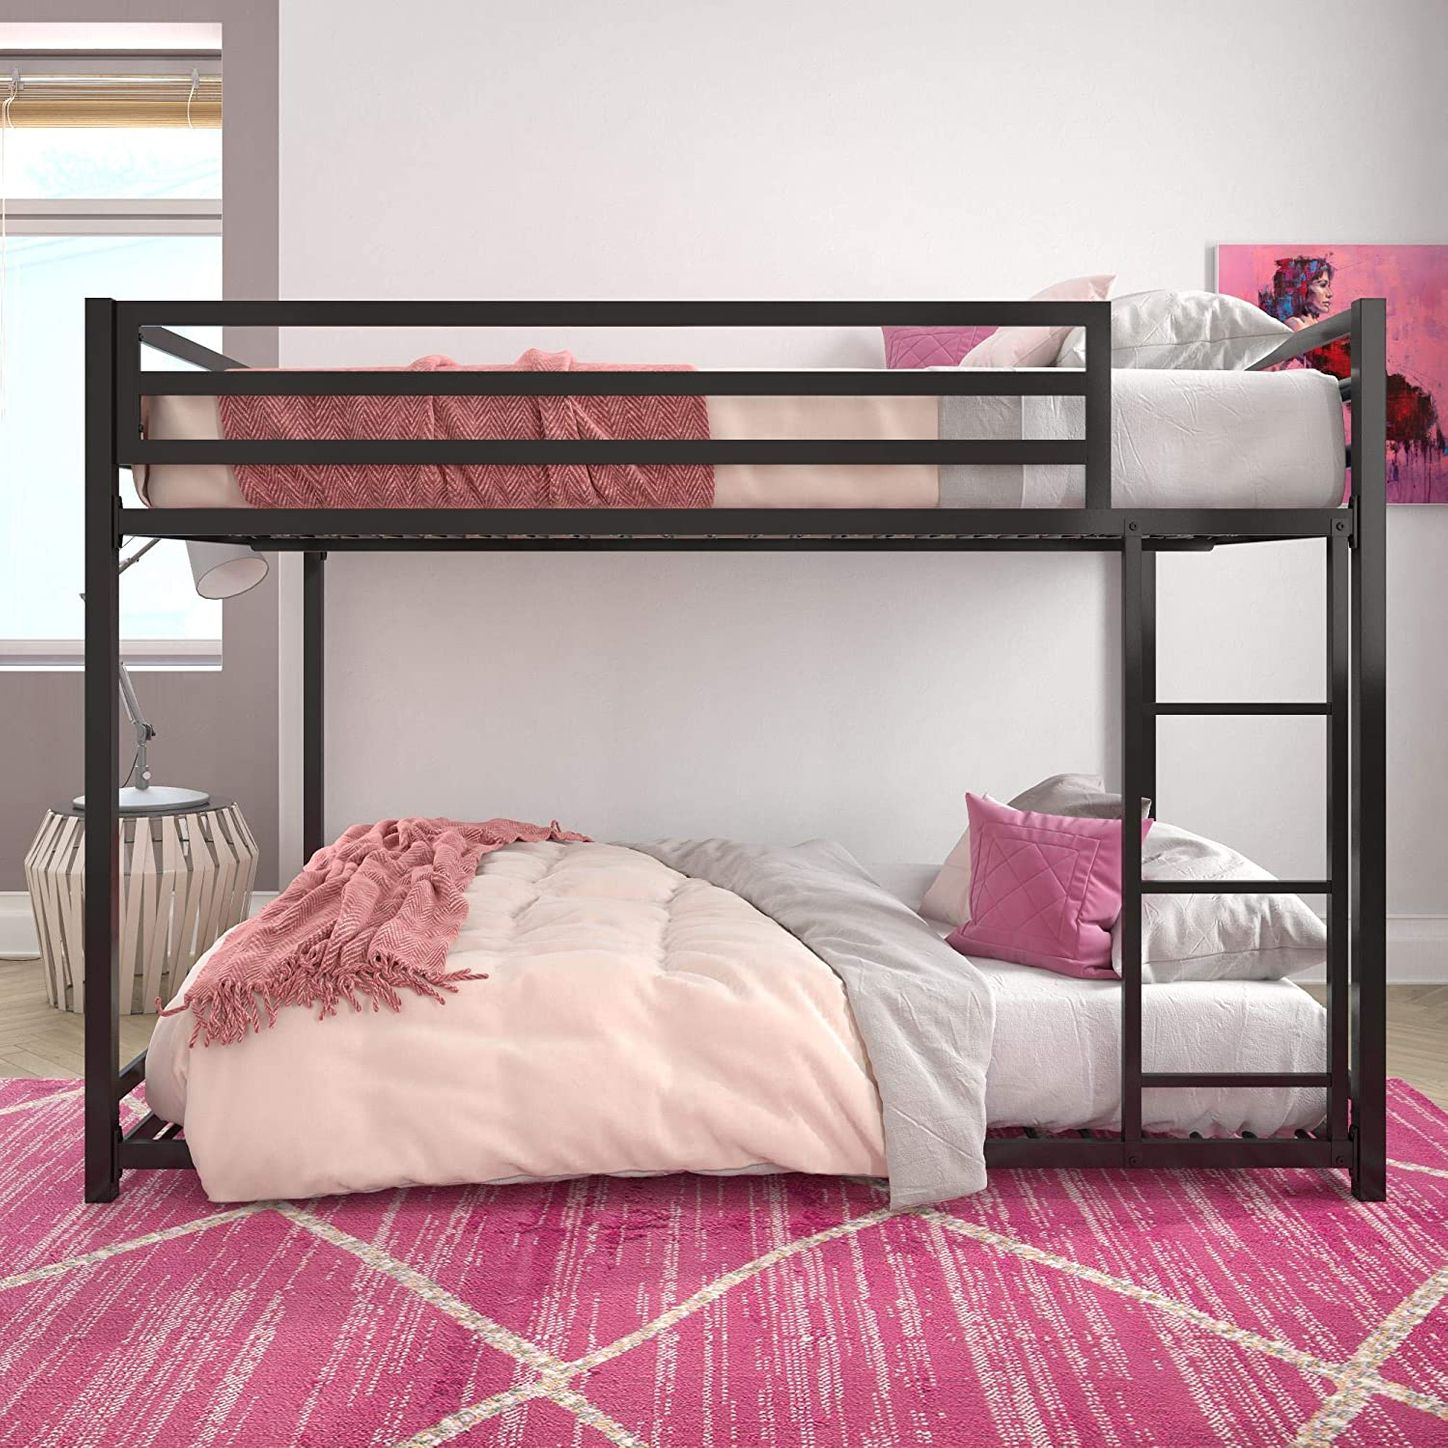 8 Best Bunk Beds 2020 The Strategist, Full Bunk Beds For Girls